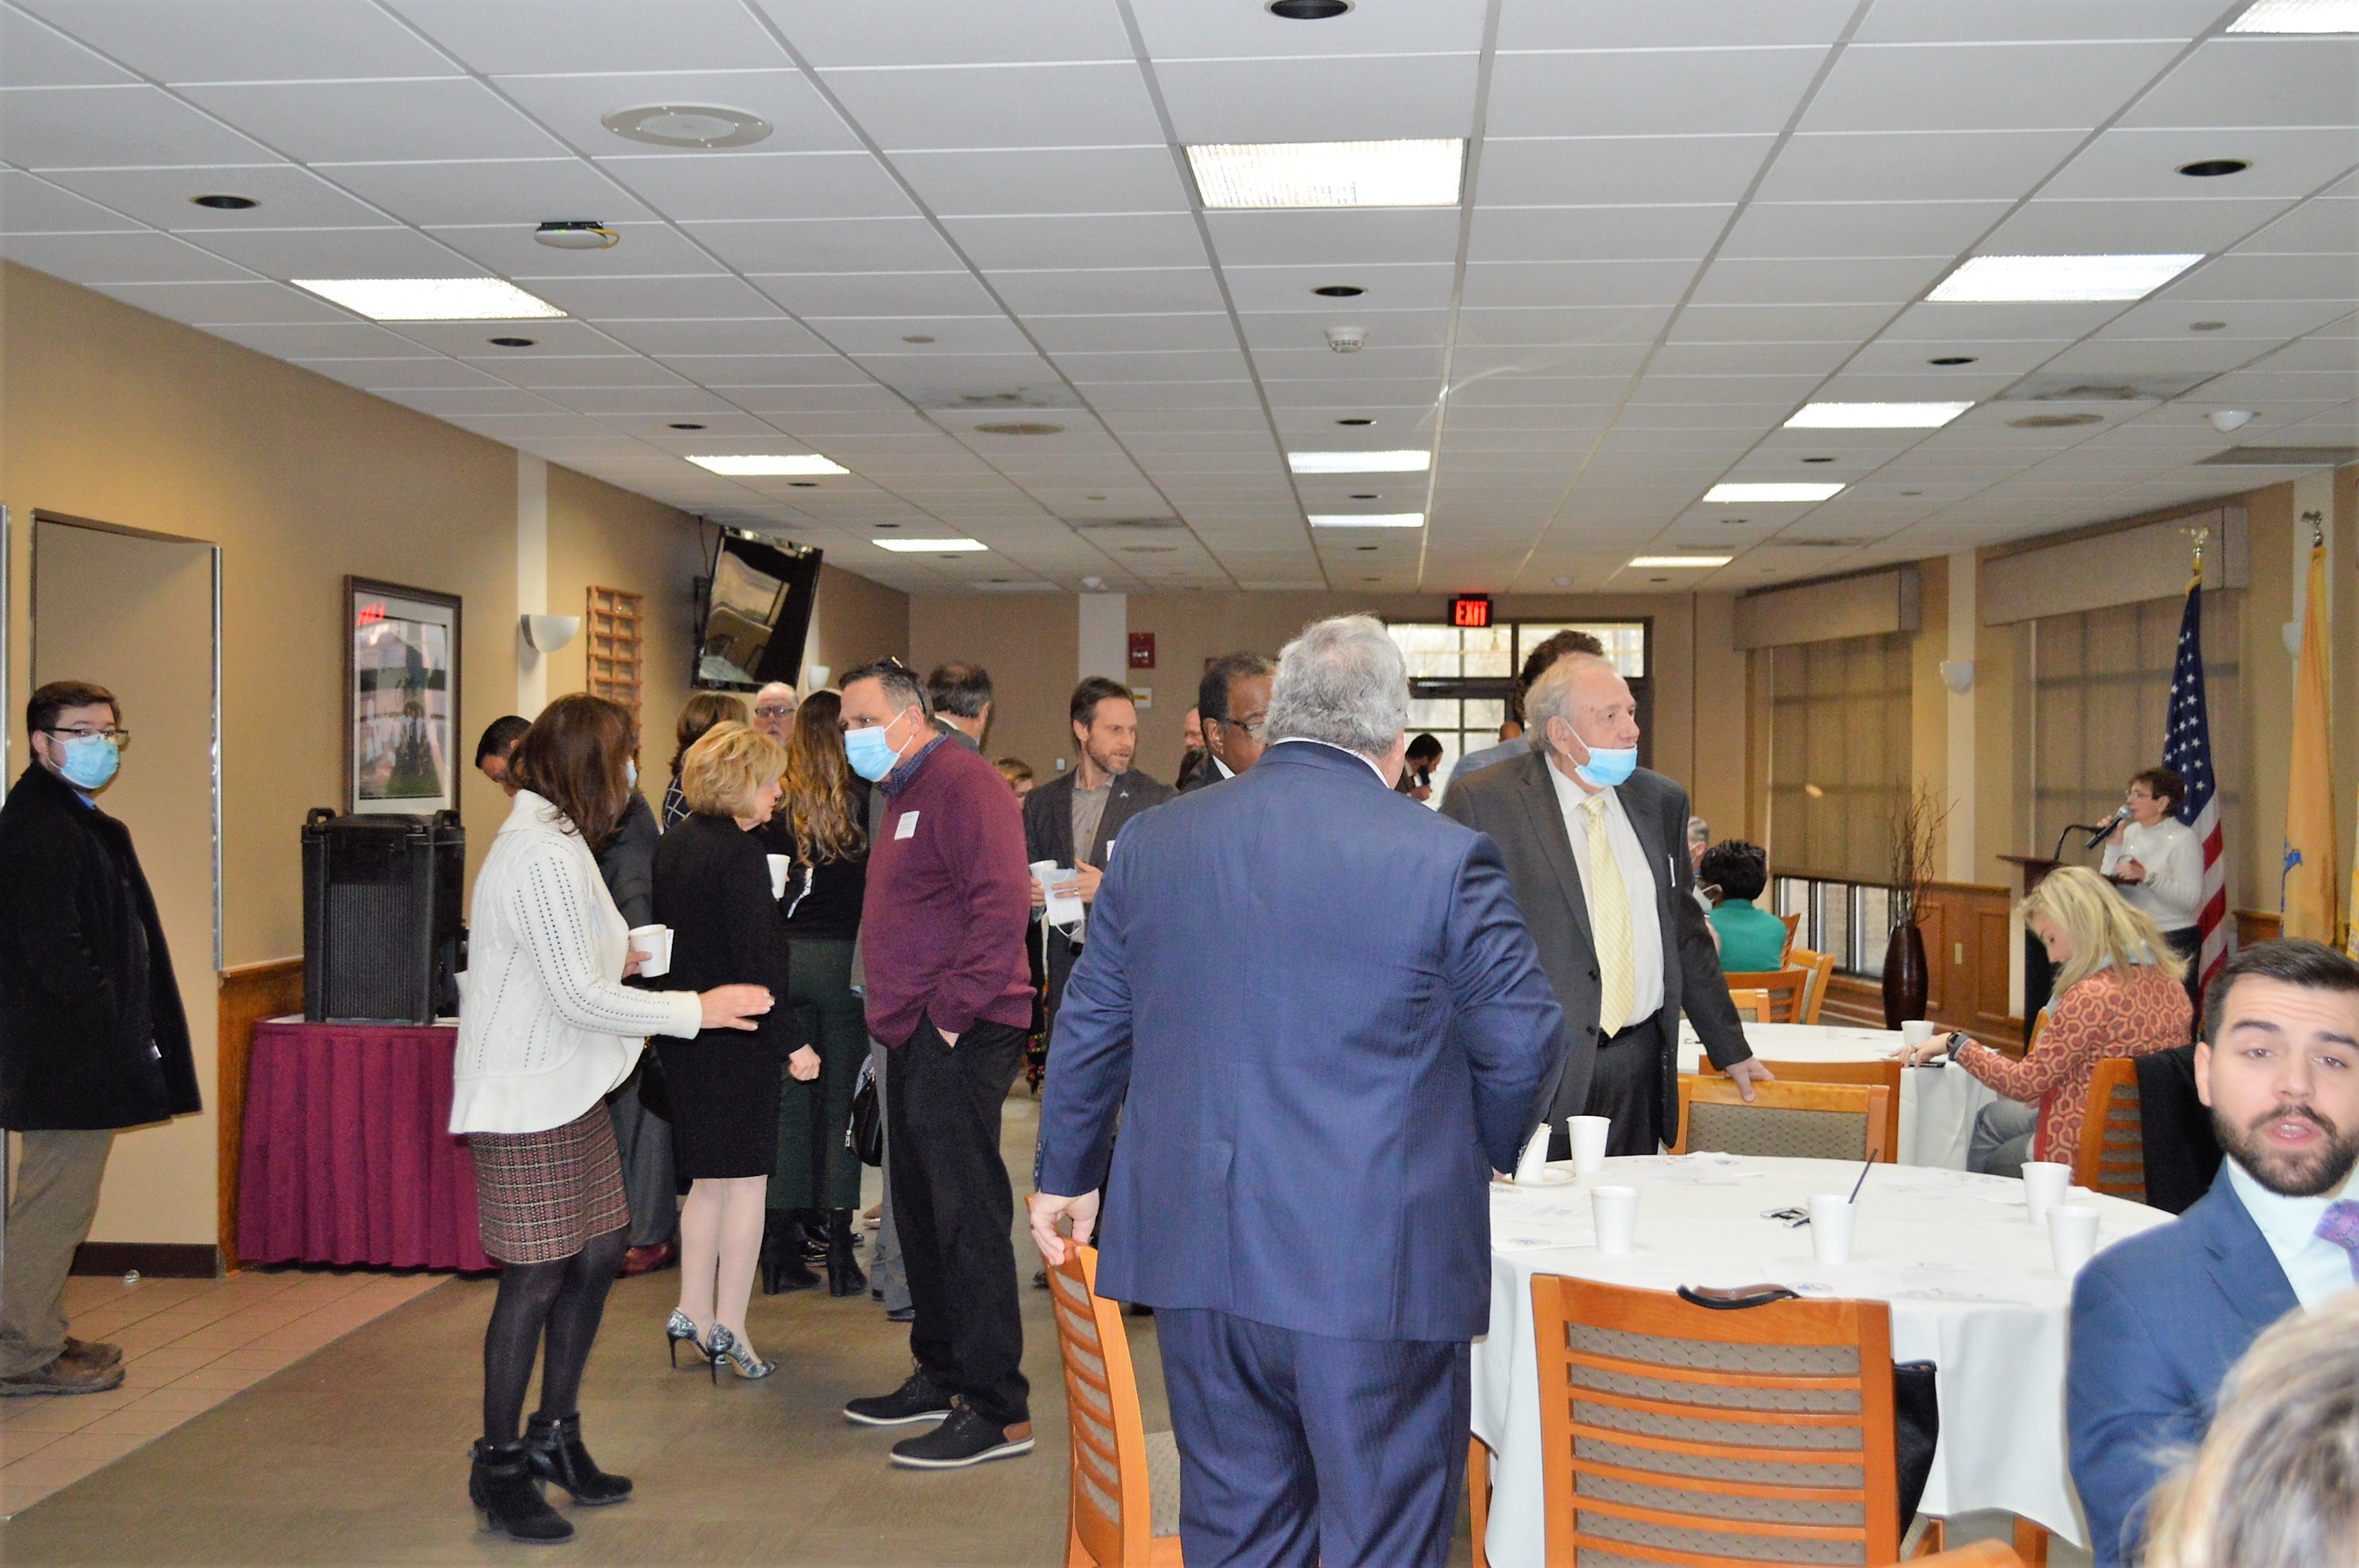 Meet the Legislators event hosted by the Southern New Jersey Development Council Wednesday, Jan. 26, 2022 at Careme's restuarant.